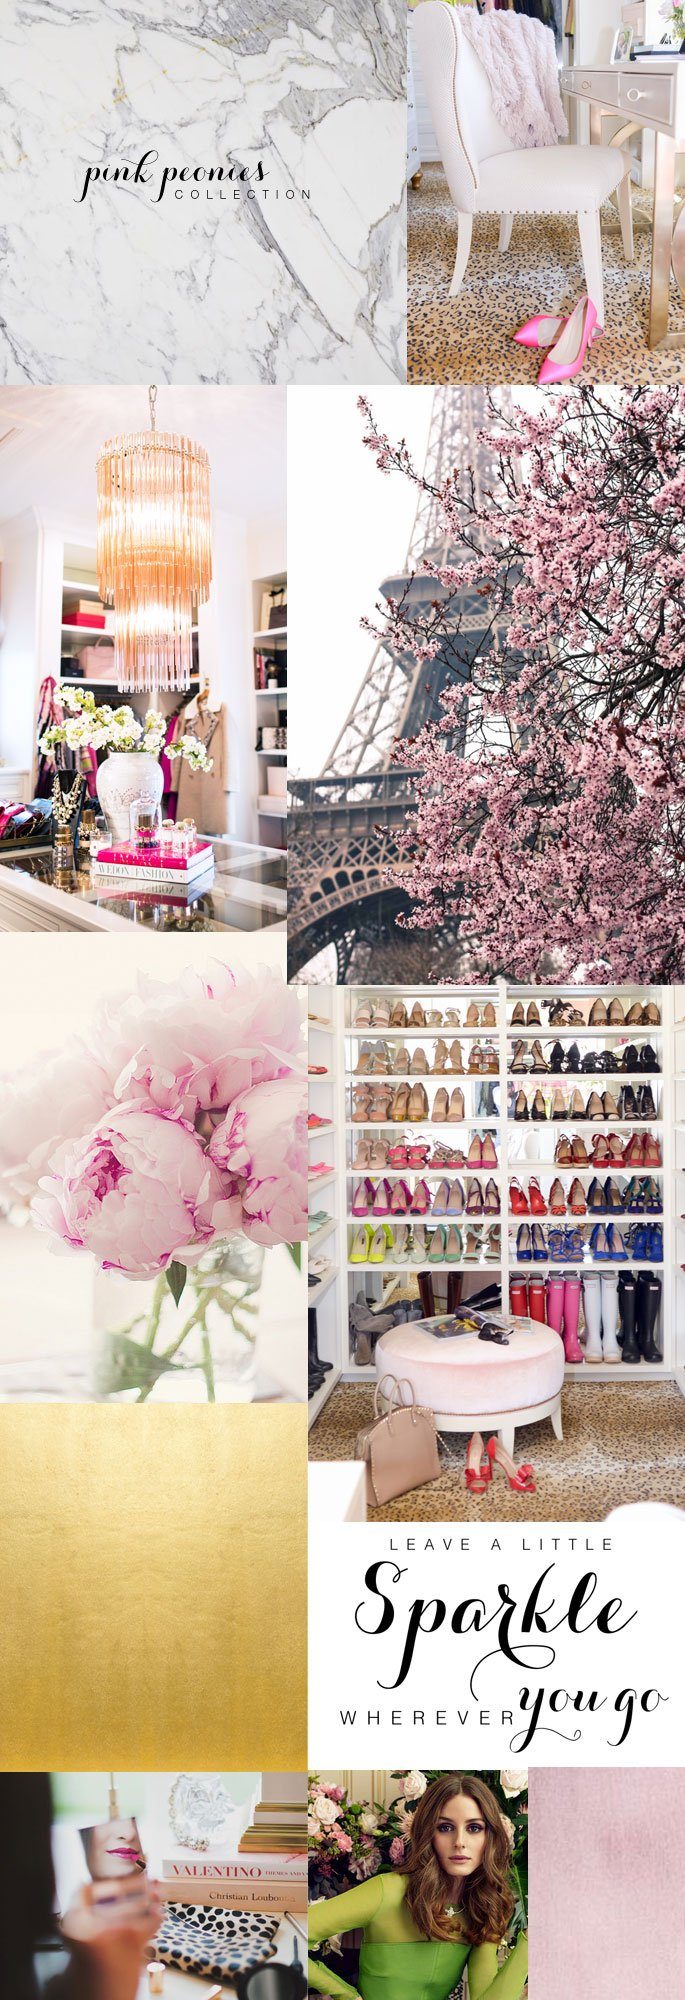 Pink Peonies Collection: Inspiration…